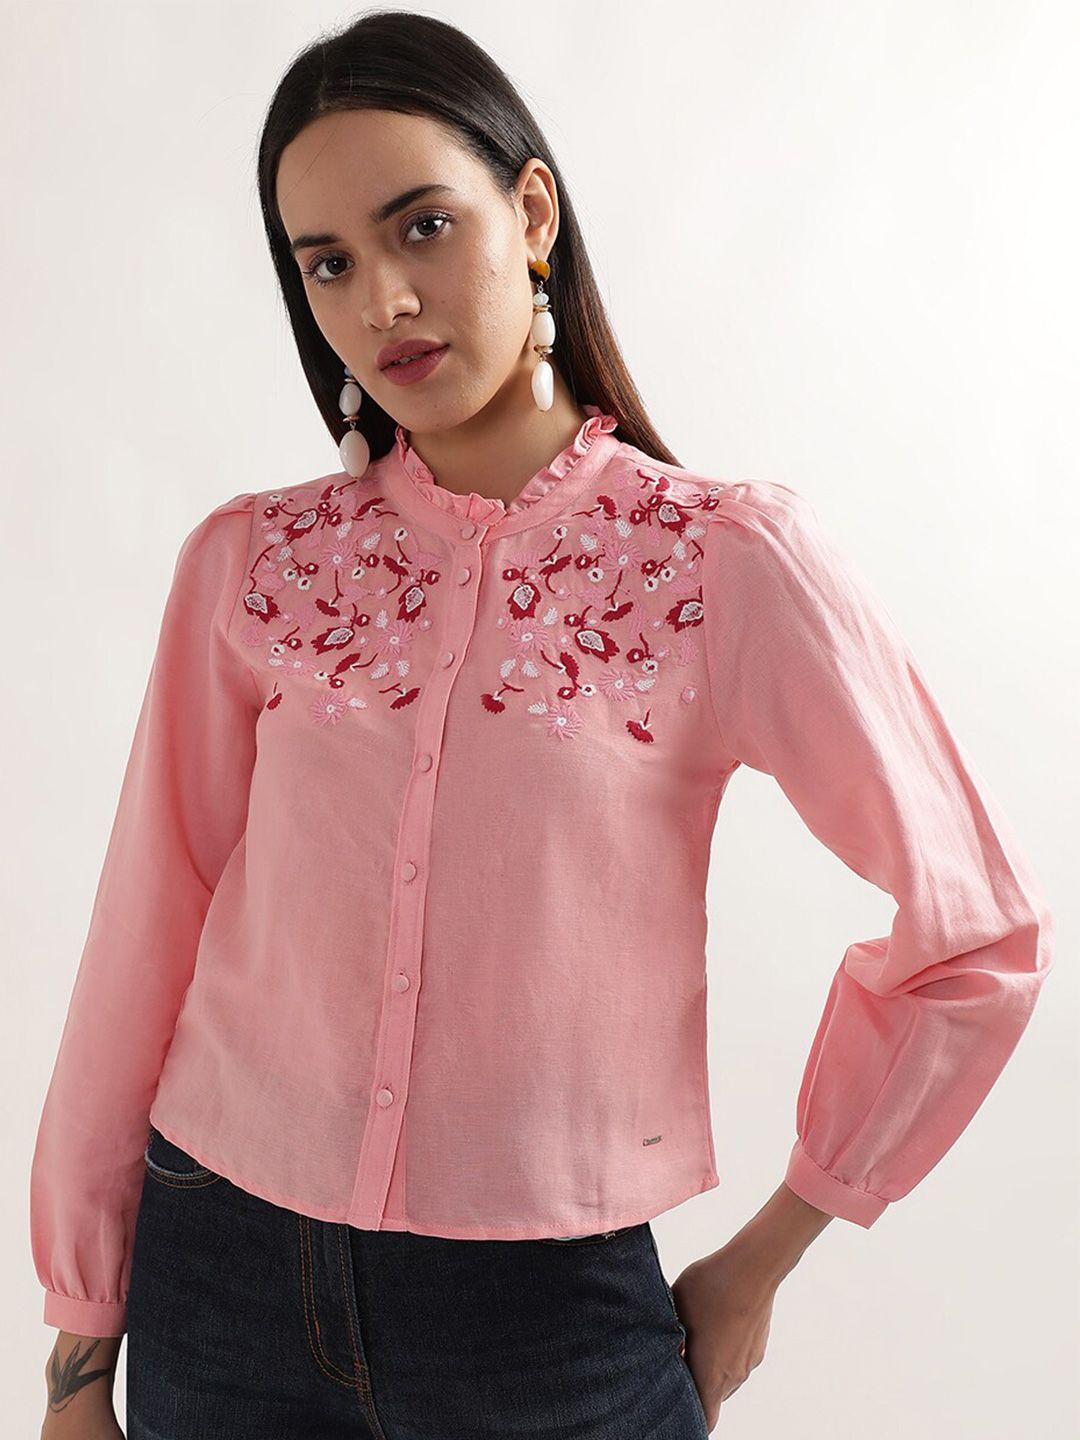 elle pink floral embroidered puff sleeves linen shirt style top